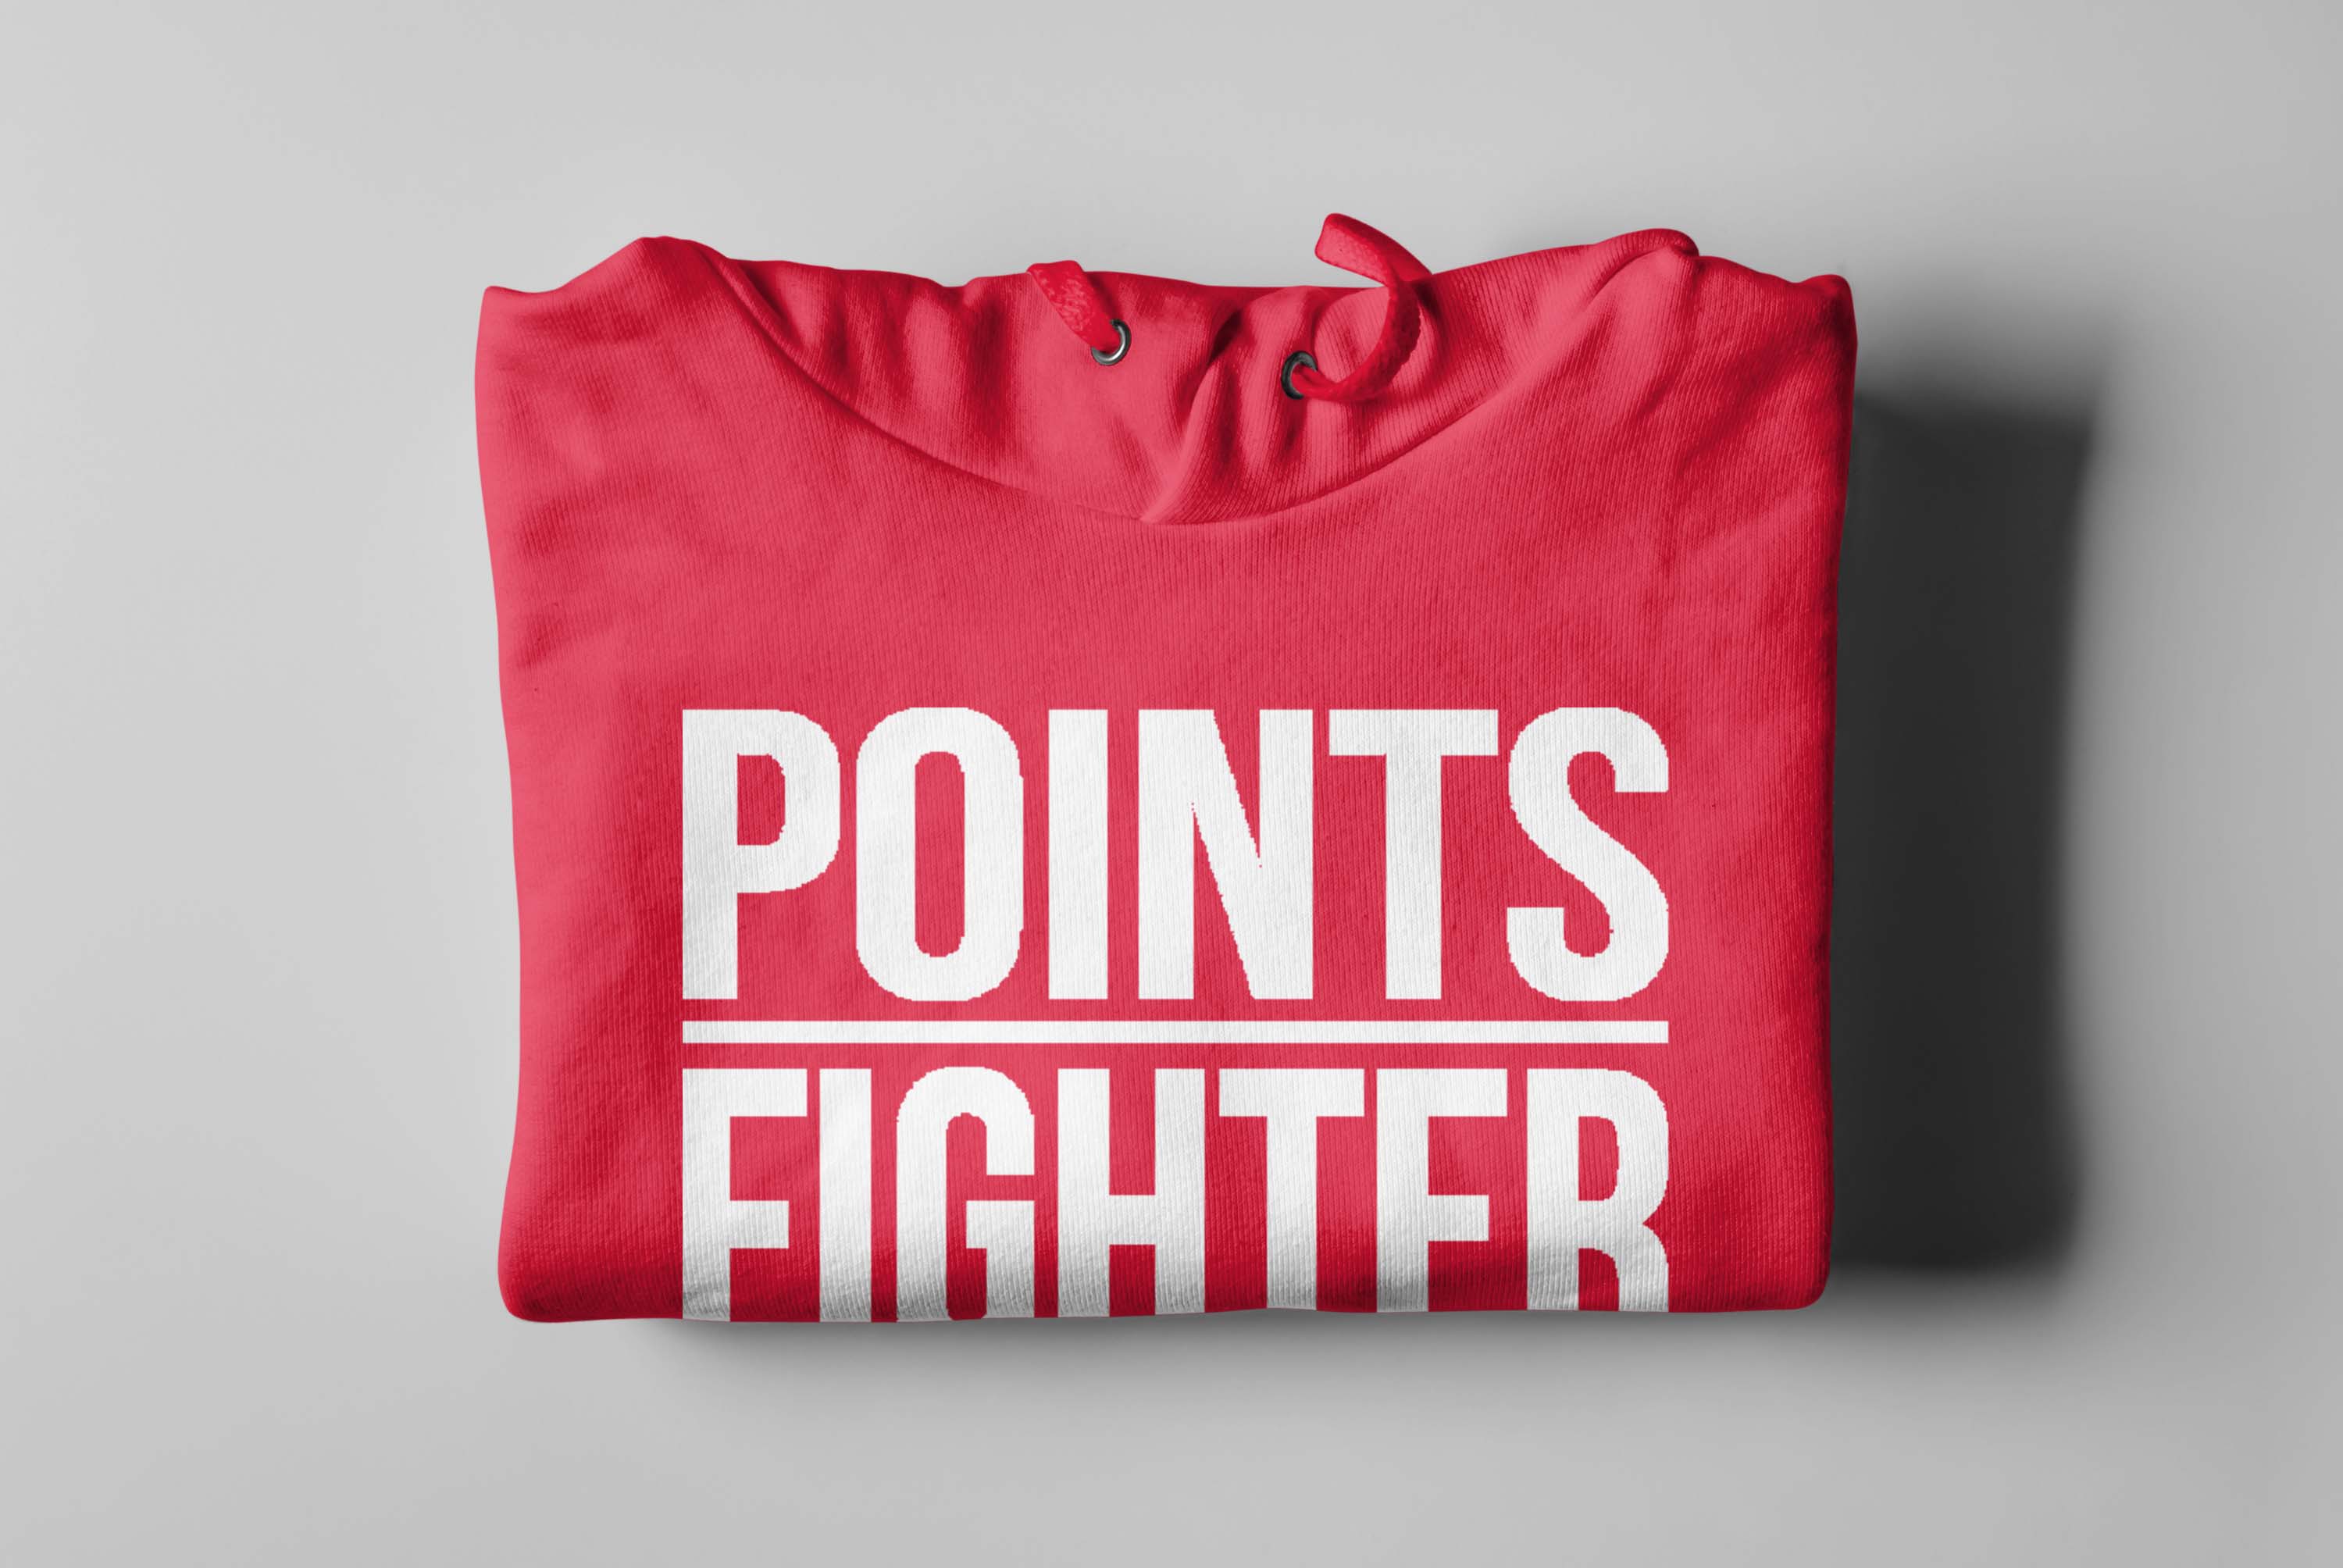 Points Fighter Hoodie - Red